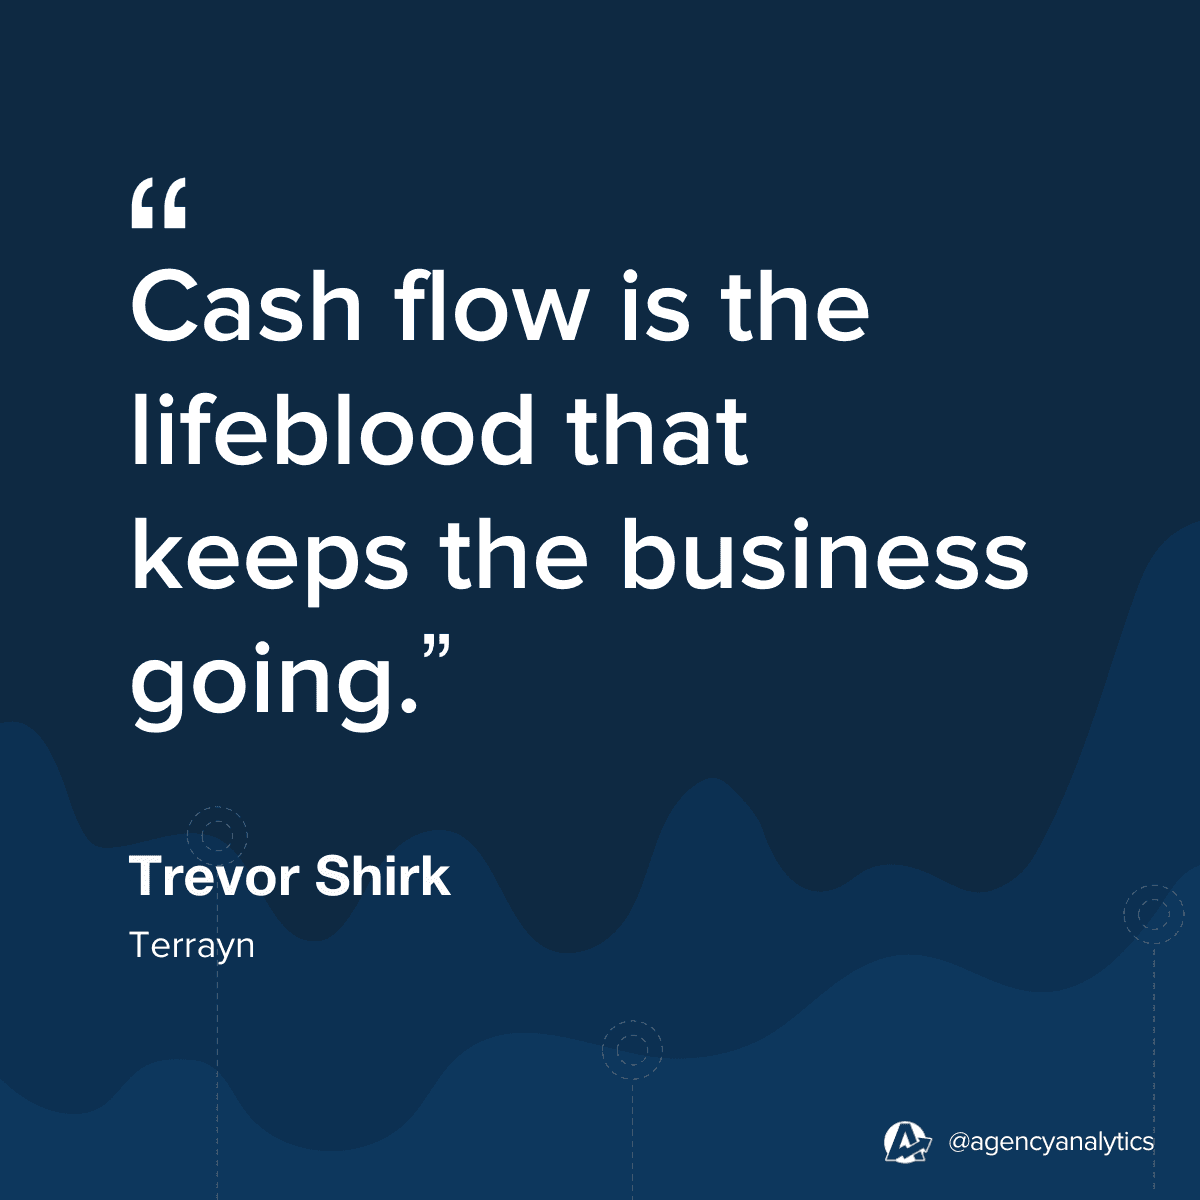 Quote from Trevor Shirk about Managing Cash Flow at a Marketing Agency